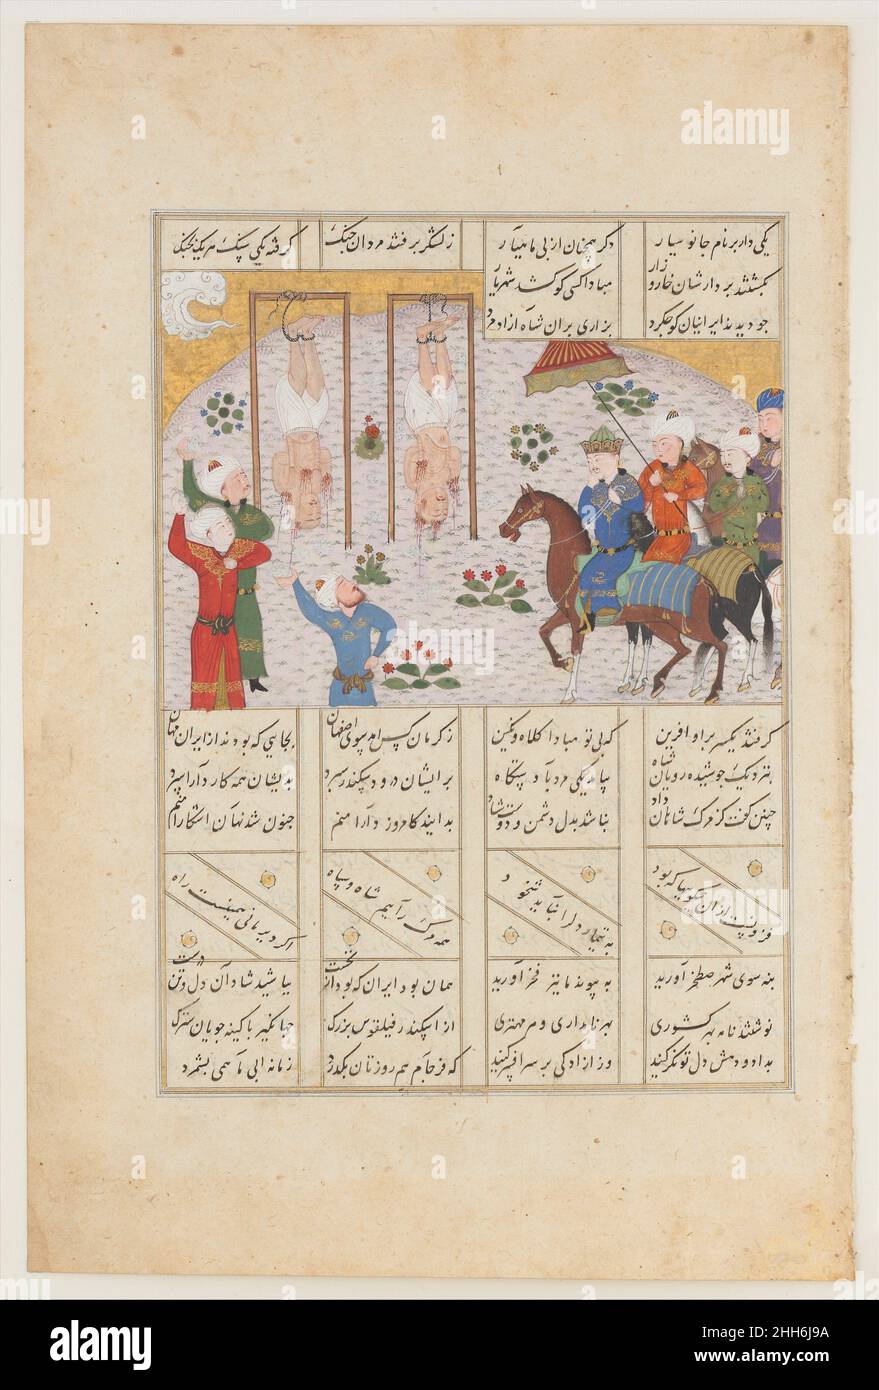 'Alexander Executes Janusiyar and Mahiyar, the Slayers of Darius', Folio from a Shahnama (Book of Kings) of Firdausi dated A.H. 887/A.D. 1482 Abu'l Qasim Firdausi Alexander the Great figures prominently in Persian literature and histories, including in the Shahnama, where he is described as the half-brother of the Persian king Darab, who is sometimes considered to be the historical figure Darius. Alexander and Darius go to war, and Darius’s attendants decide to kill him and pledge their allegiance to Alexander. When Alexander discovers the dying Darius, however, he tells him of their common pa Stock Photo